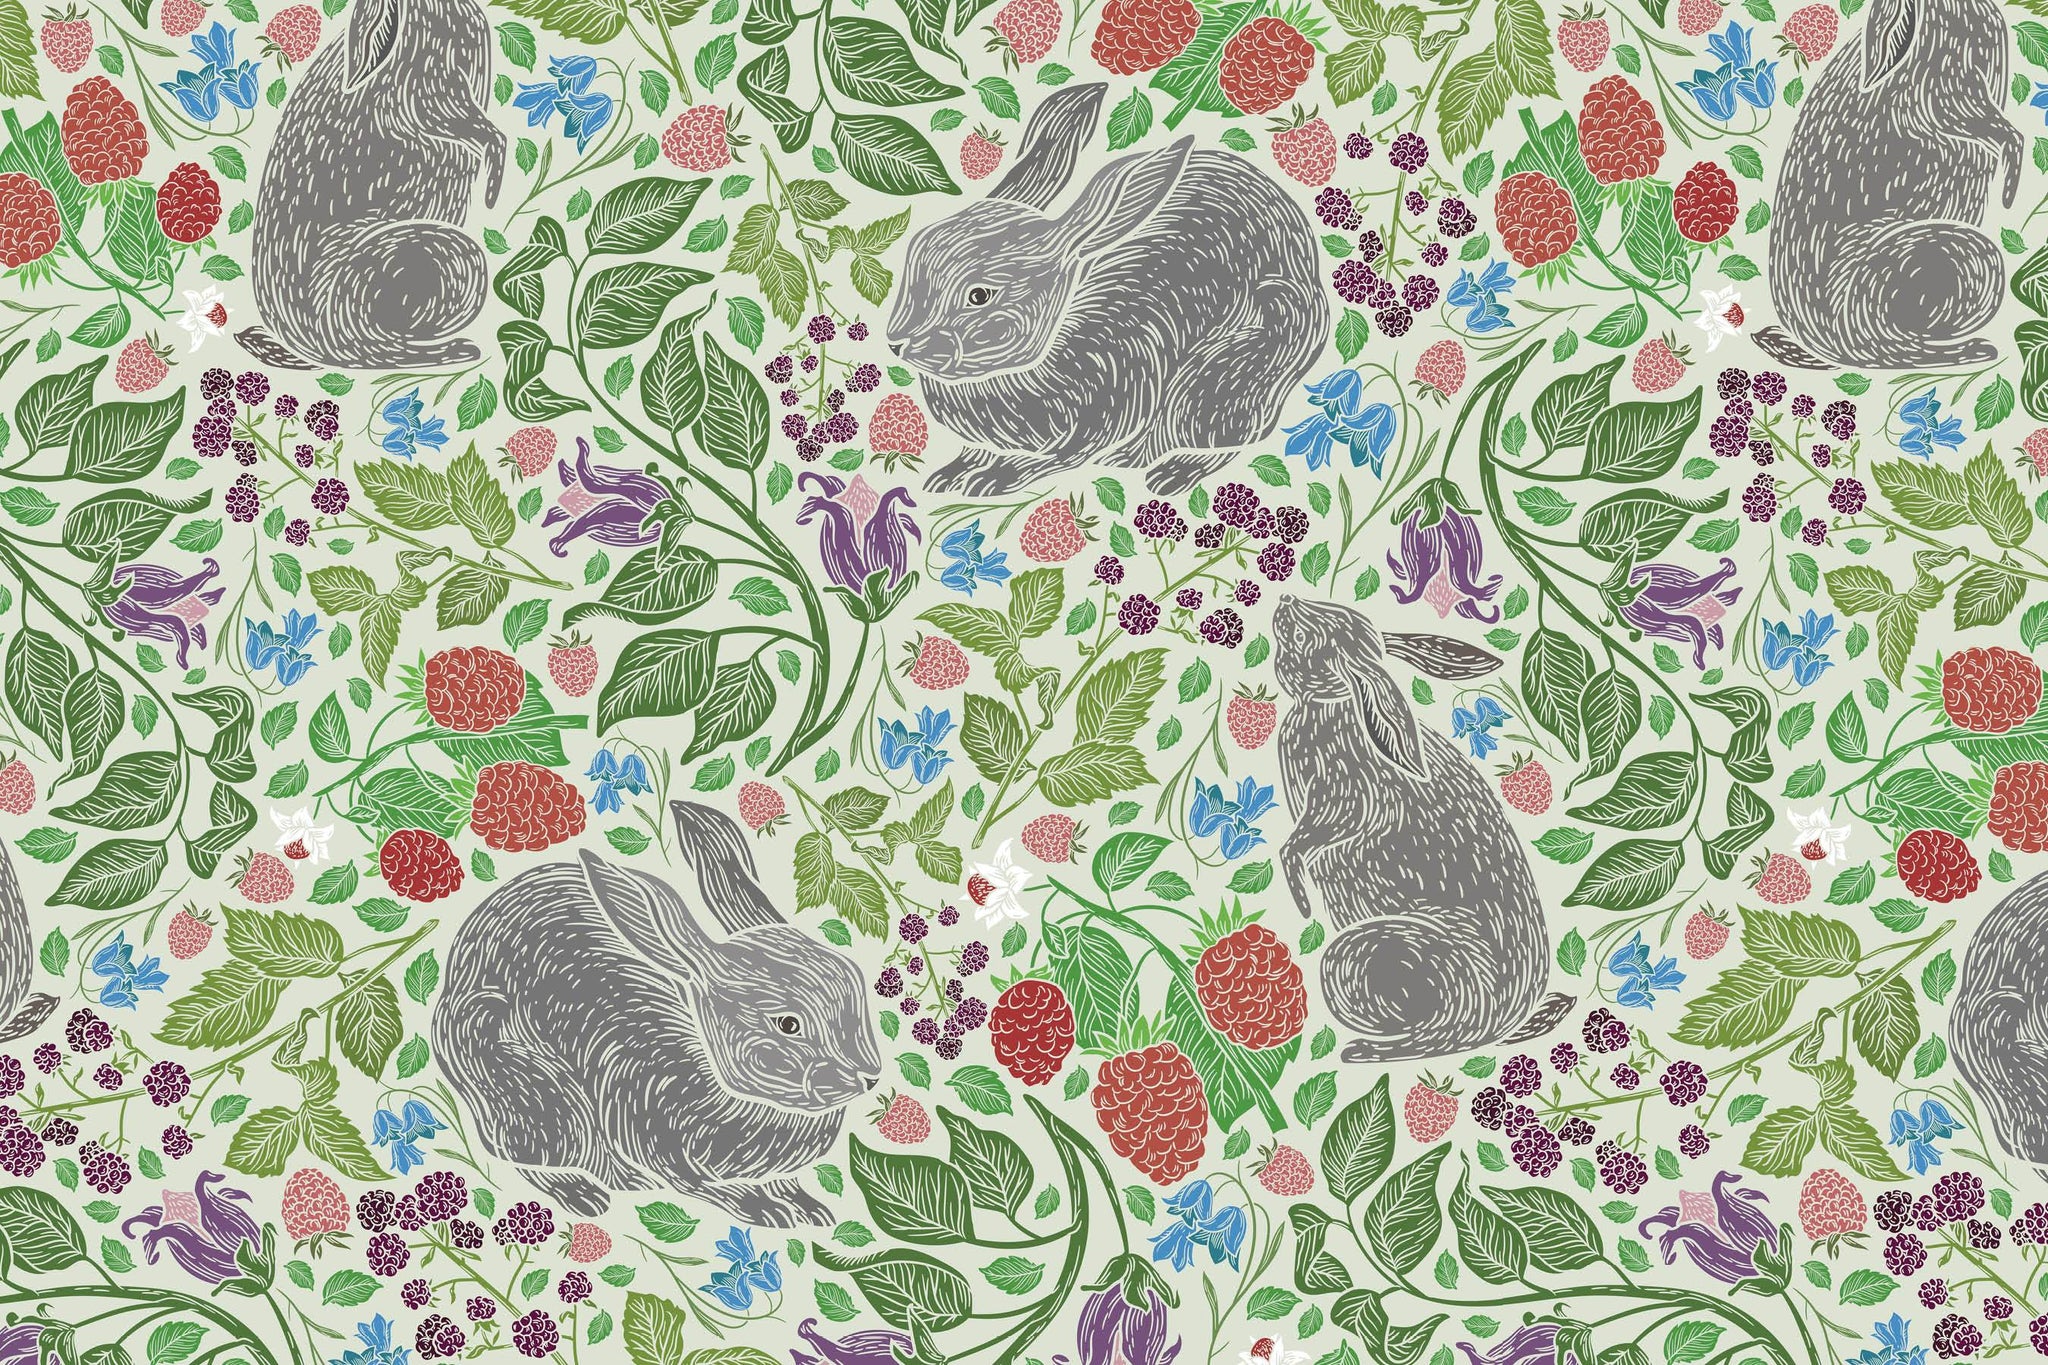 Bunny in the Garden Placemats